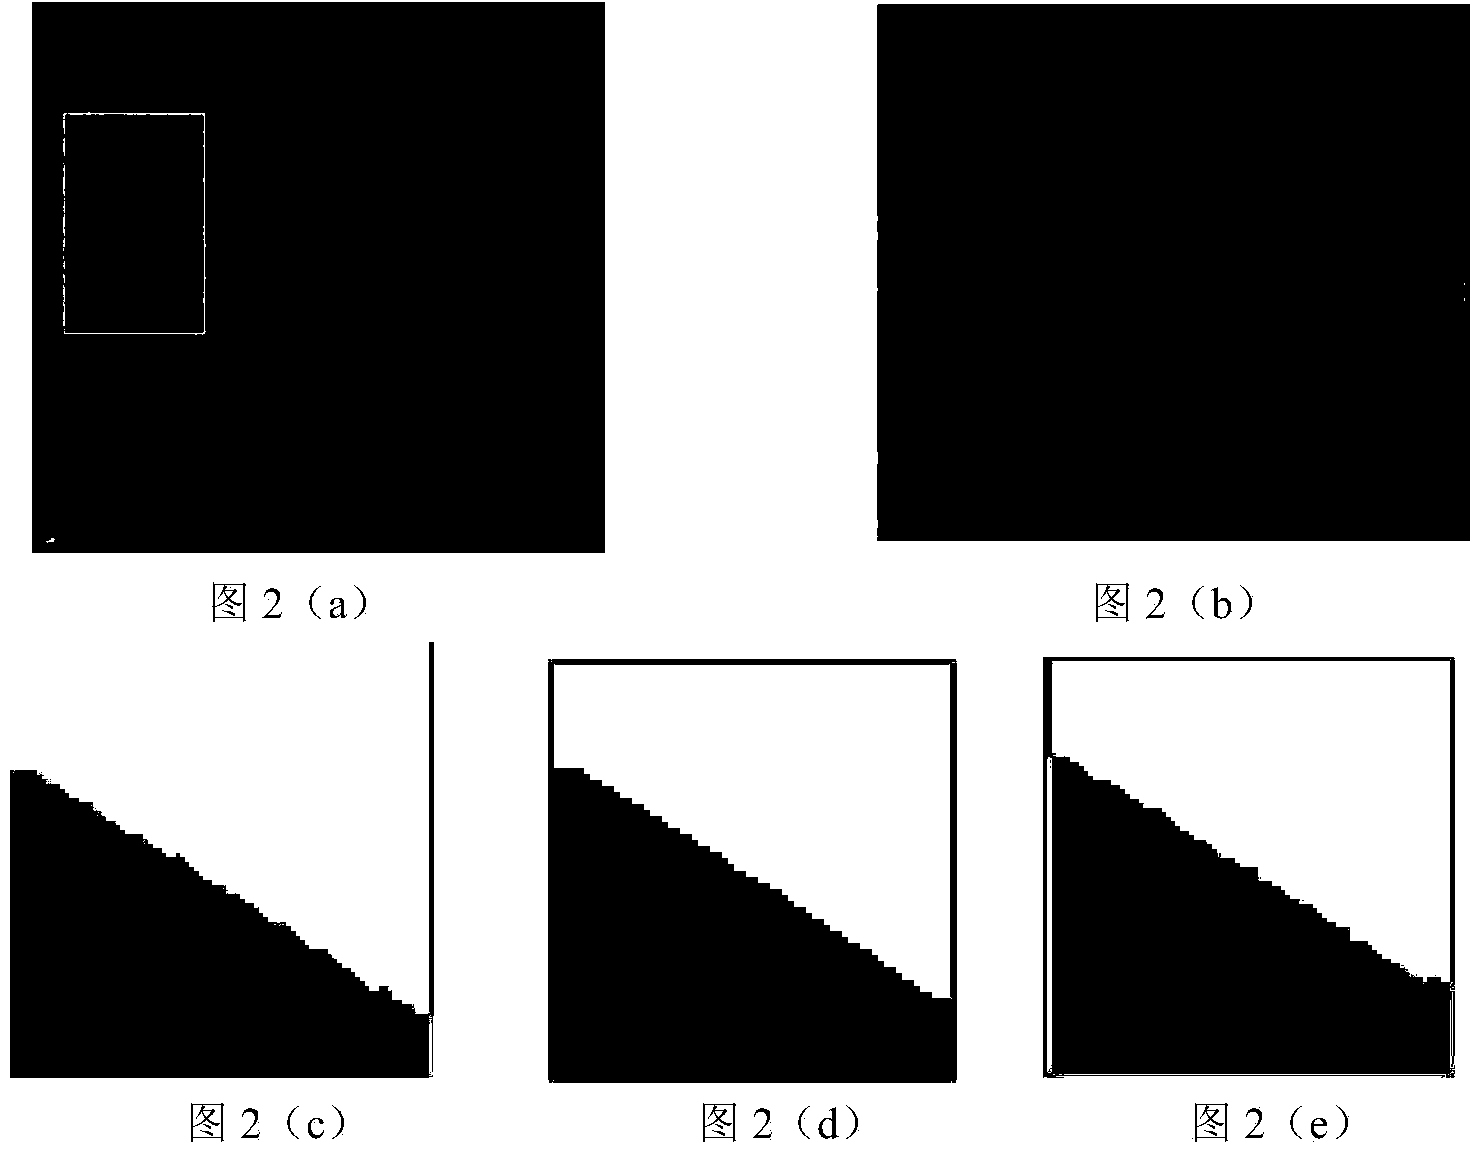 SAR image ground object cutting method based on random projection and improved spectral cluster